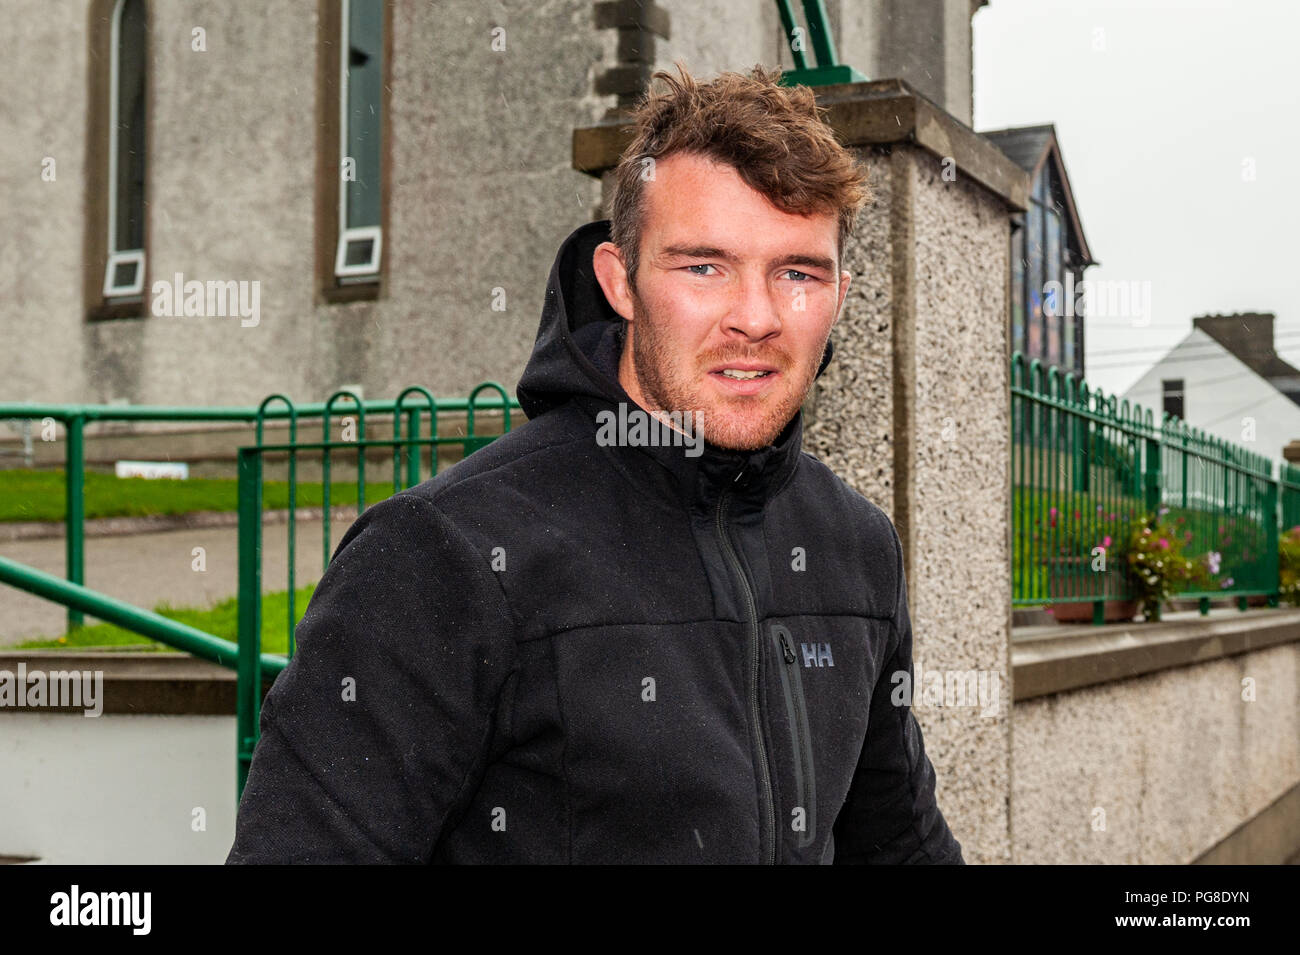 Schull, West Cork, Ireland. 24th Aug, 2018. Newly engaged Munster rugby captain Peter O'Mahony is currently on holiday in Schull. Although it was raining when this picture was taken, Peter said he had a great time in Schull.  He's due to leave Schull on Sunday. Credit: AG News/Alamy Live News. Stock Photo